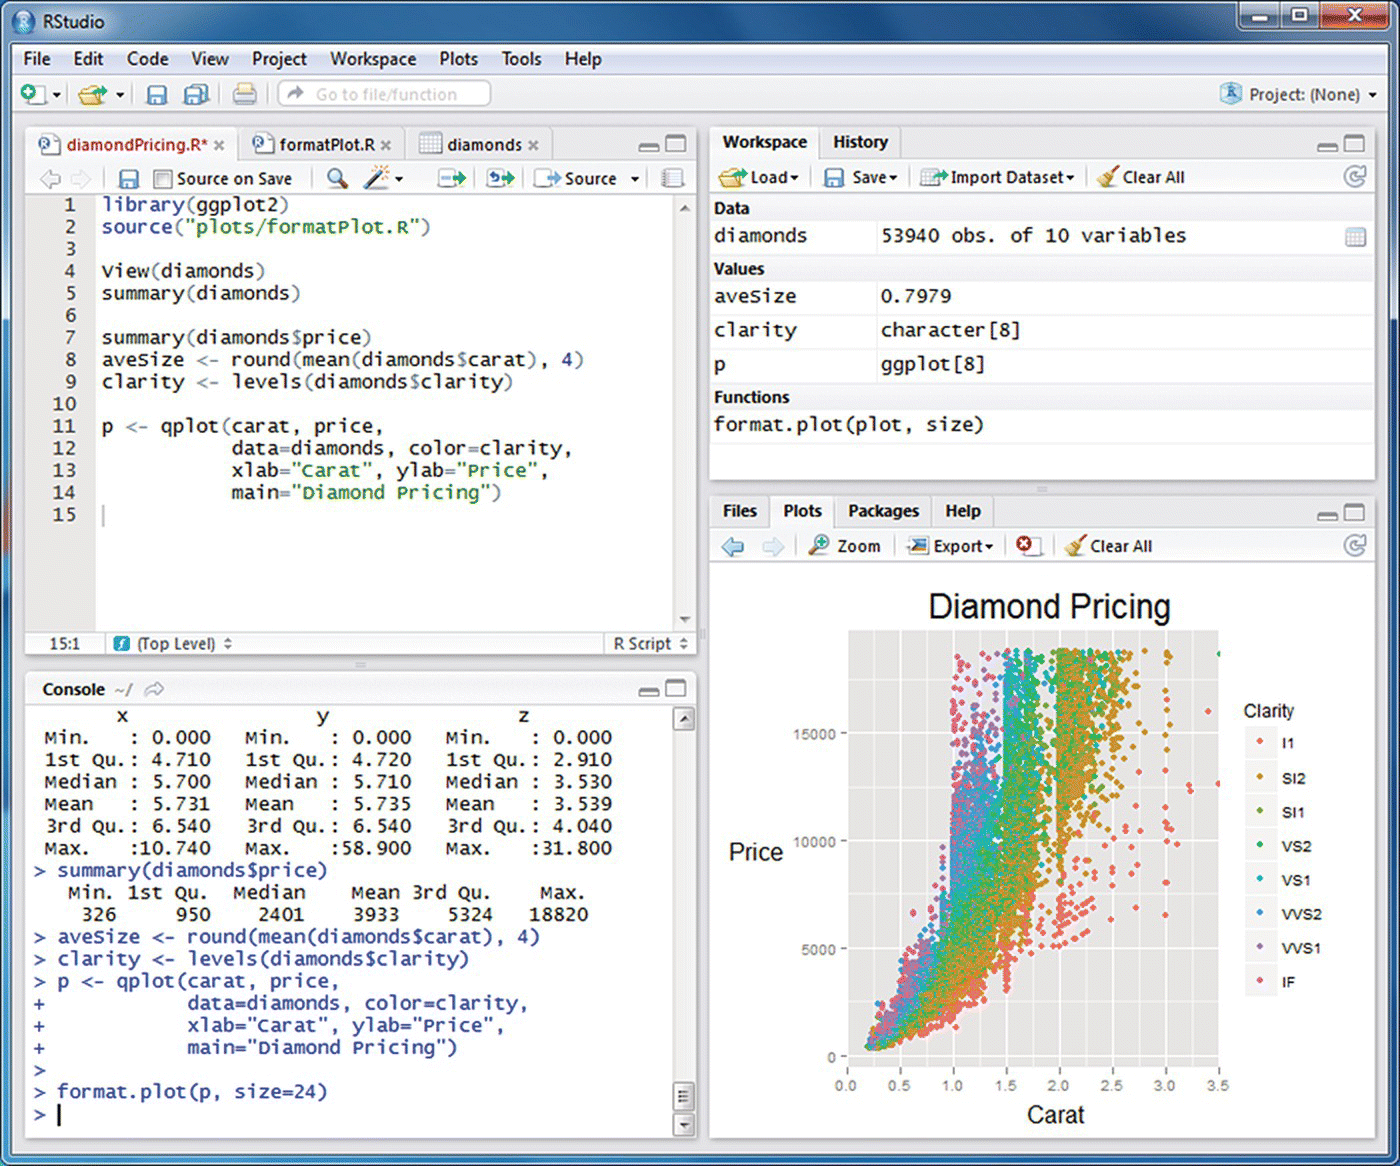 Snipped image of the RStudio window